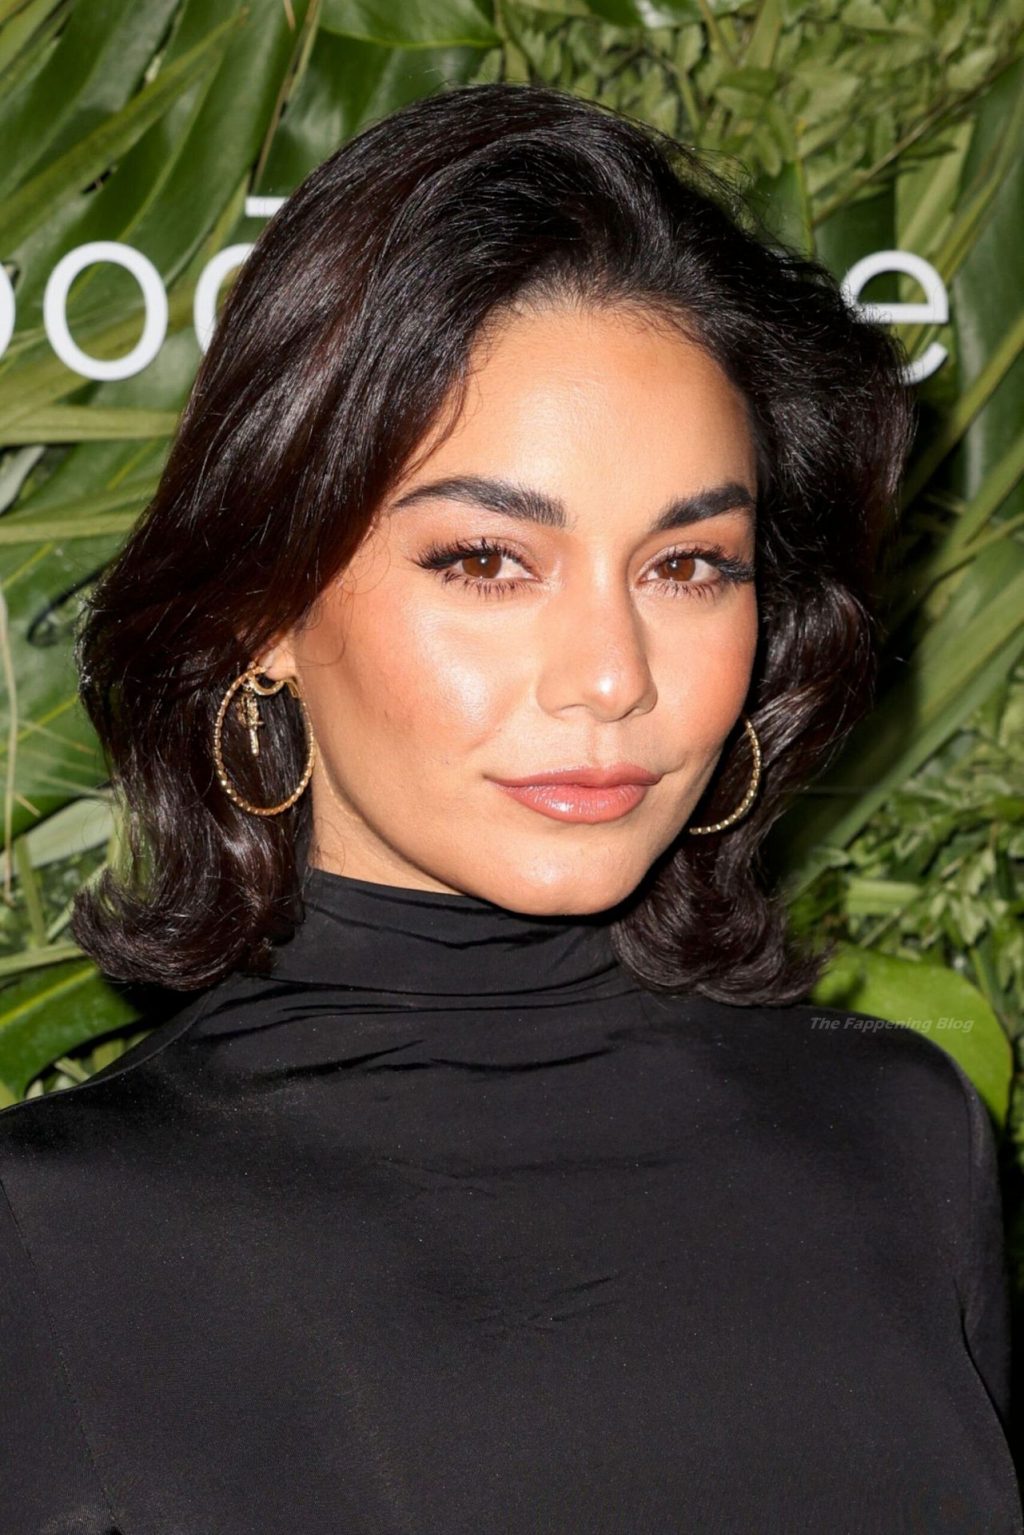 Braless Vanessa Hudgens Stuns at The Goodtime Hotel Opening in Miami (30 Photos)